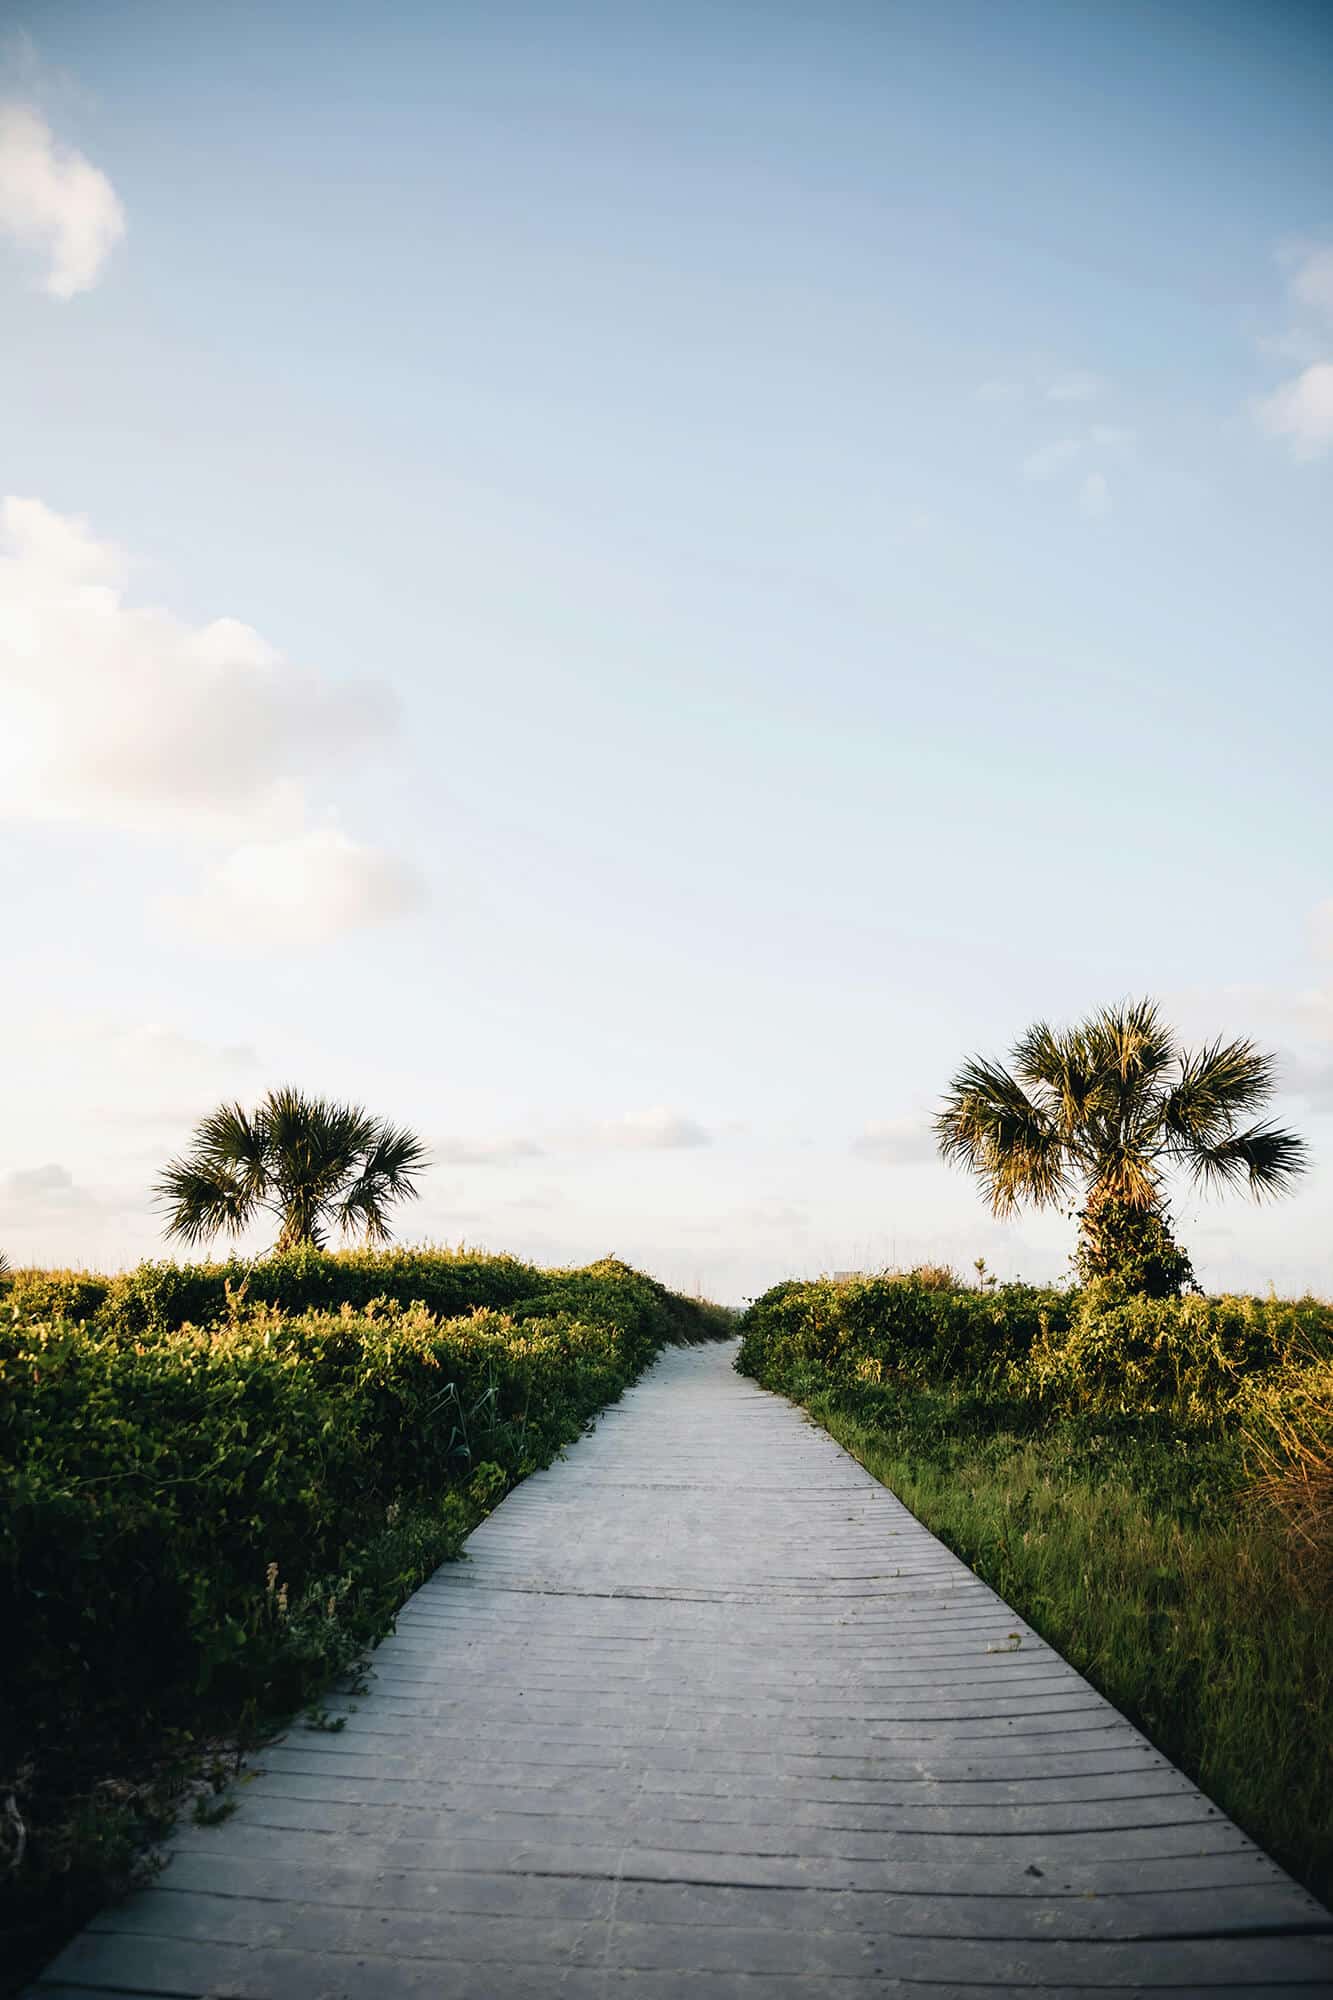 a path planked by small palm trees headed toward the beach depicting the vibrant lifestyle at Flora apartments in summerville sc - mitchell hartley FlnIZovbQjo unsplash